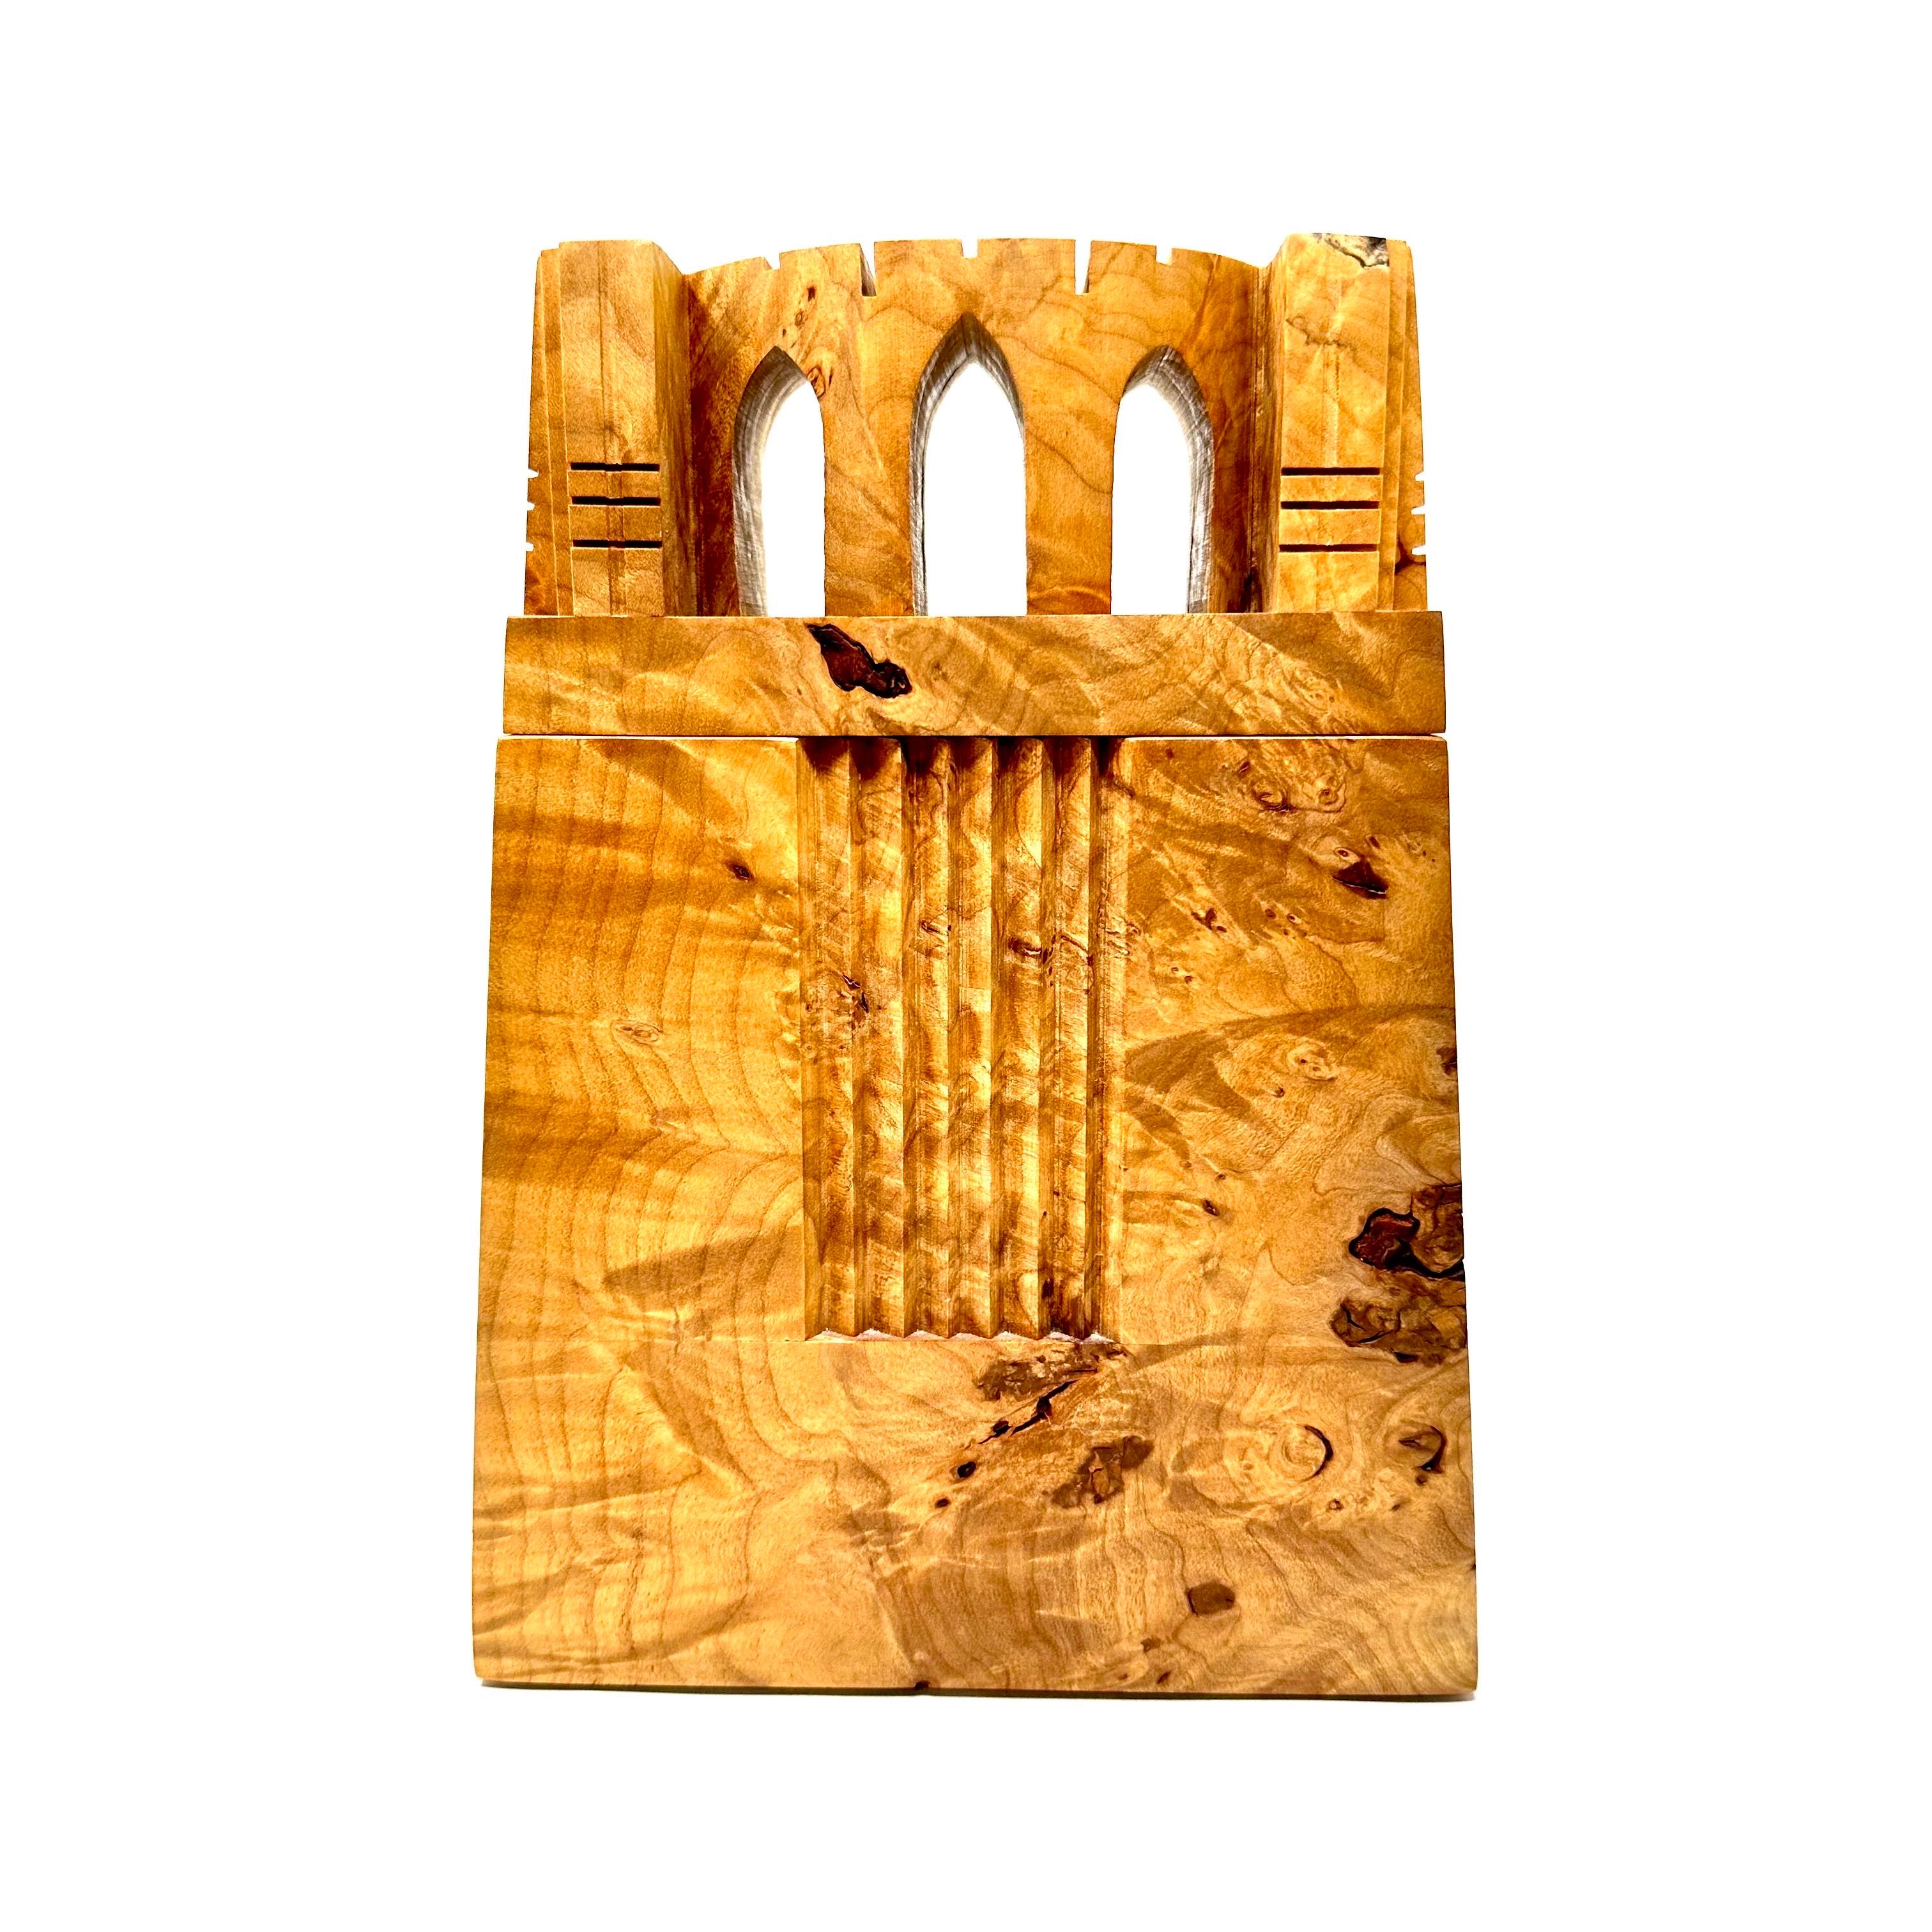 Hand-carved birdseye maple burl box by Michael Elkan Studios, Silverton, Oregon. Titled “Castles #14,” this is a beautifully carved piece, showcasing the distinctive grain and qualities of the wood. Stamped on the underside, with the original